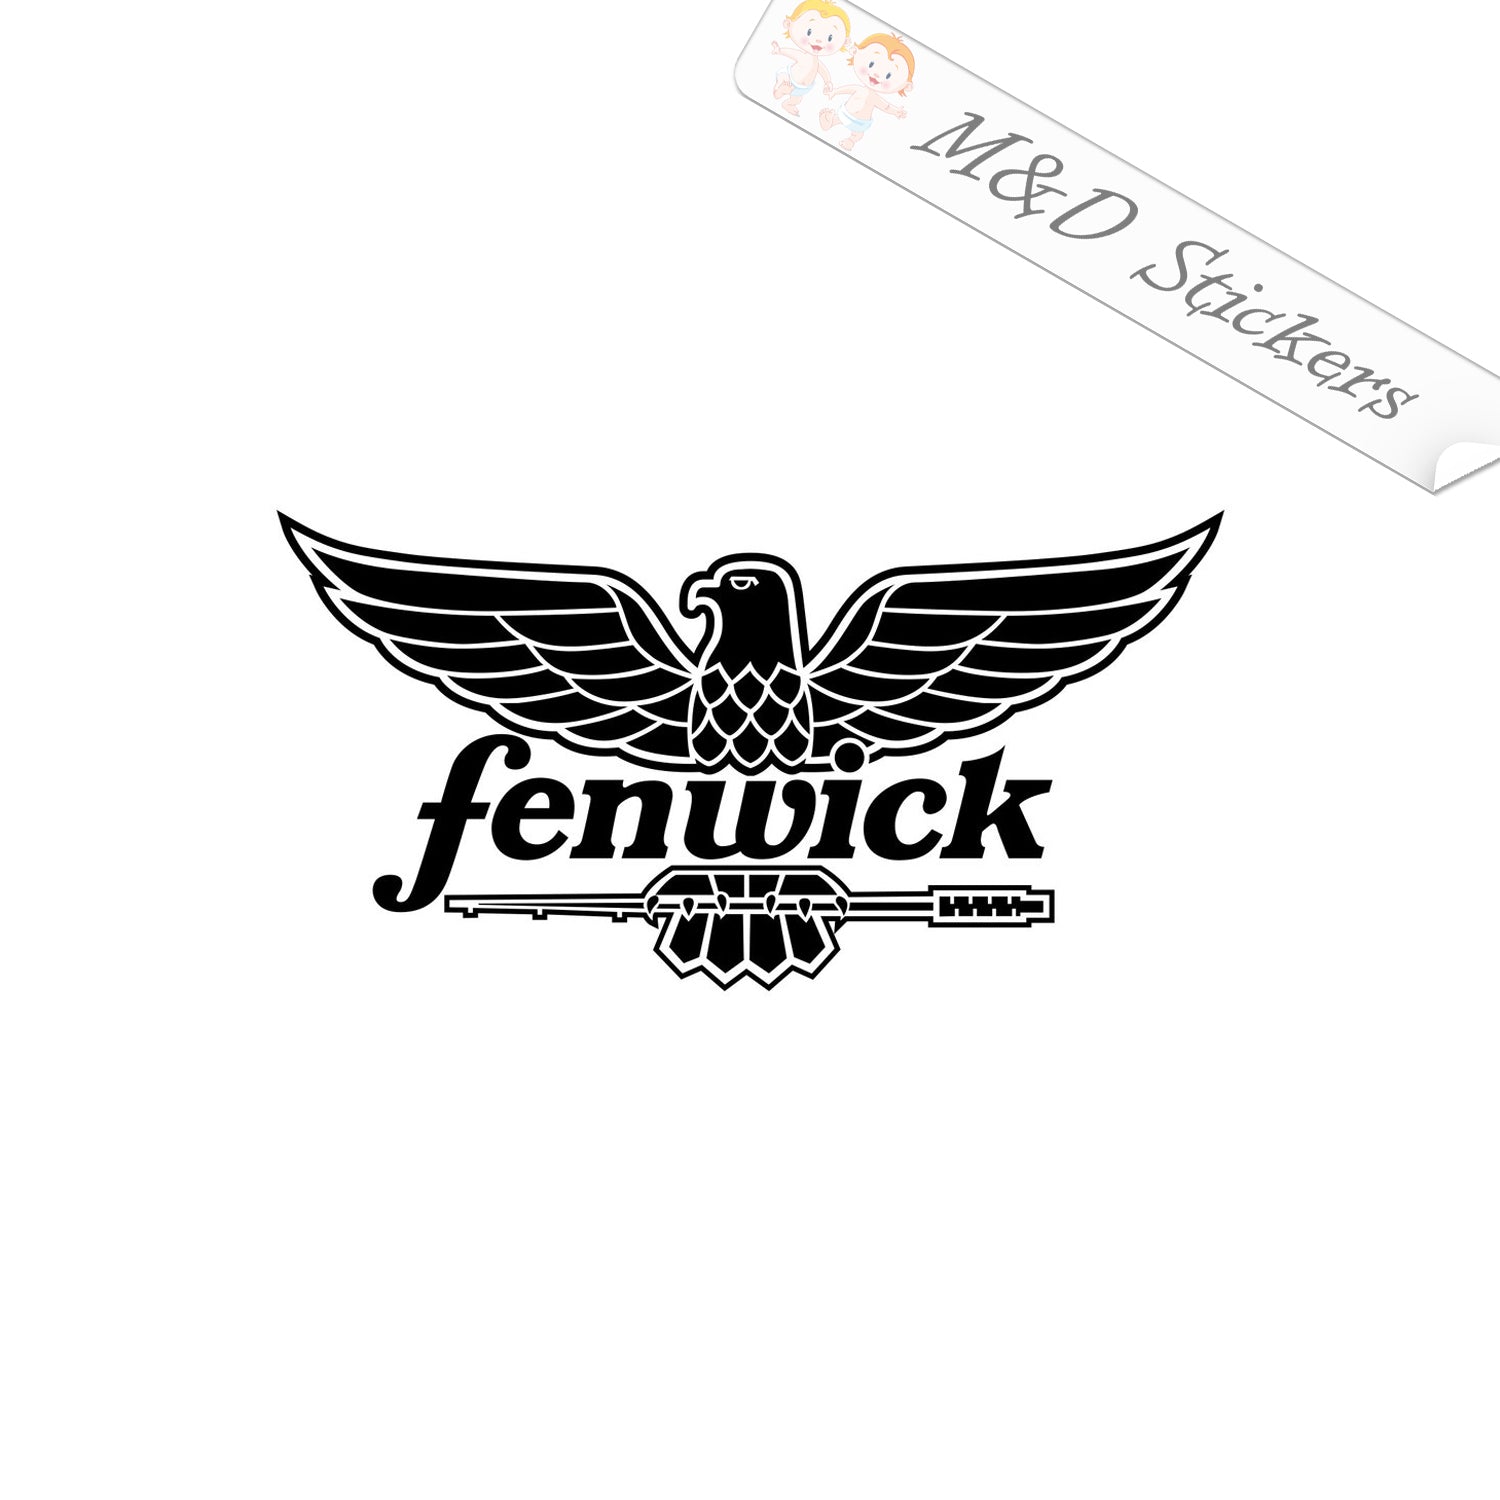 2x Fenwick Fishing Rods Vinyl Decal Sticker Different colors